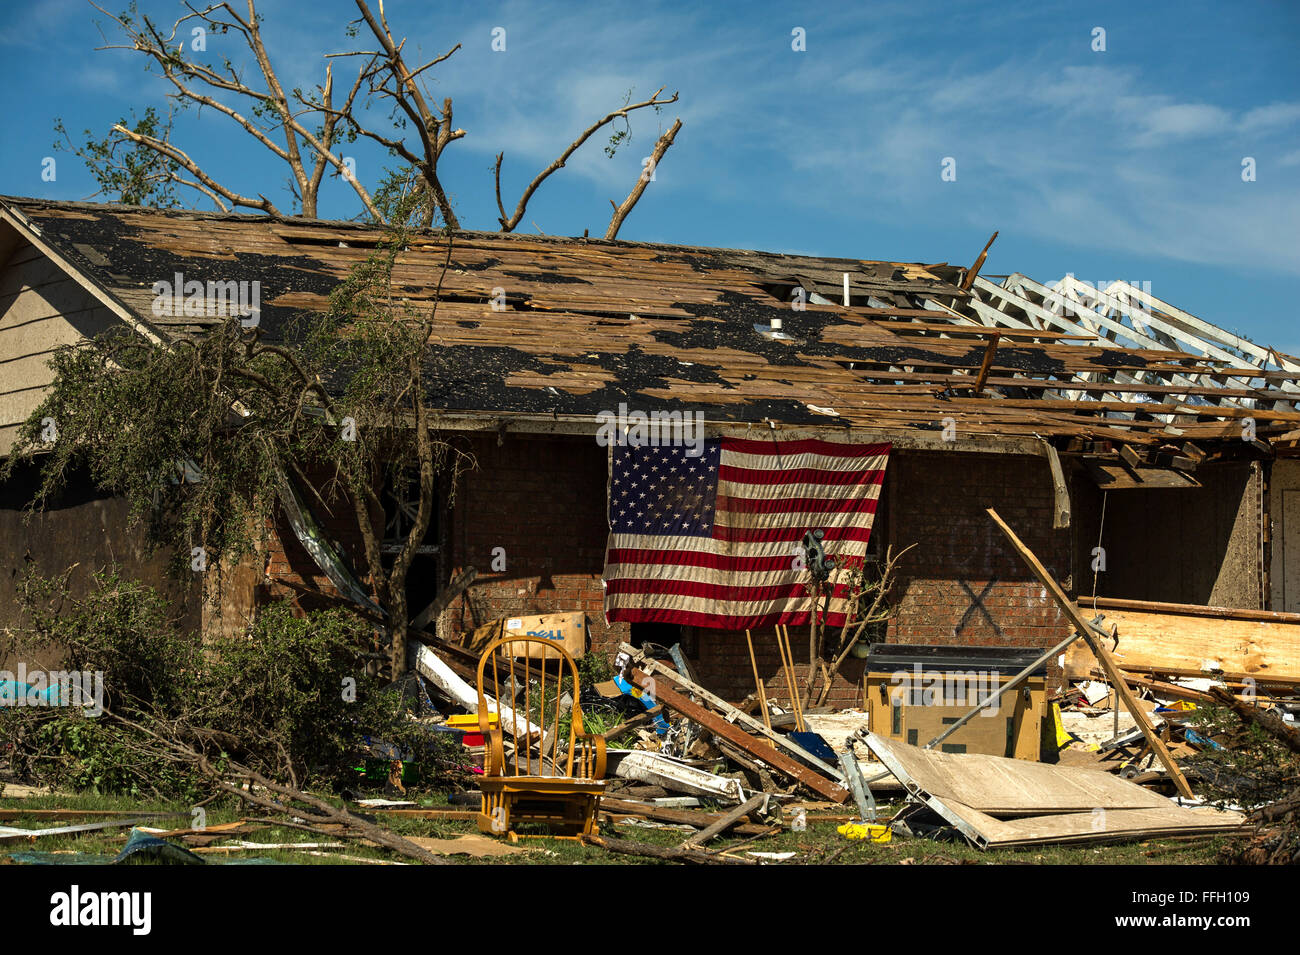 Resident in Moore, Okla. displays an American Flag on their home May 22, 2013. On Monday a EF-5 tornado, with winds reaching at least 200 mph, traveled for 20 miles, leaving a two-mile-wide path of destruction, leveling homes, crushing vehicles, and killing more than 20 people. More than 115 Oklahoma National Guard have been activated to assist in the rescue and relief efforts. Stock Photo